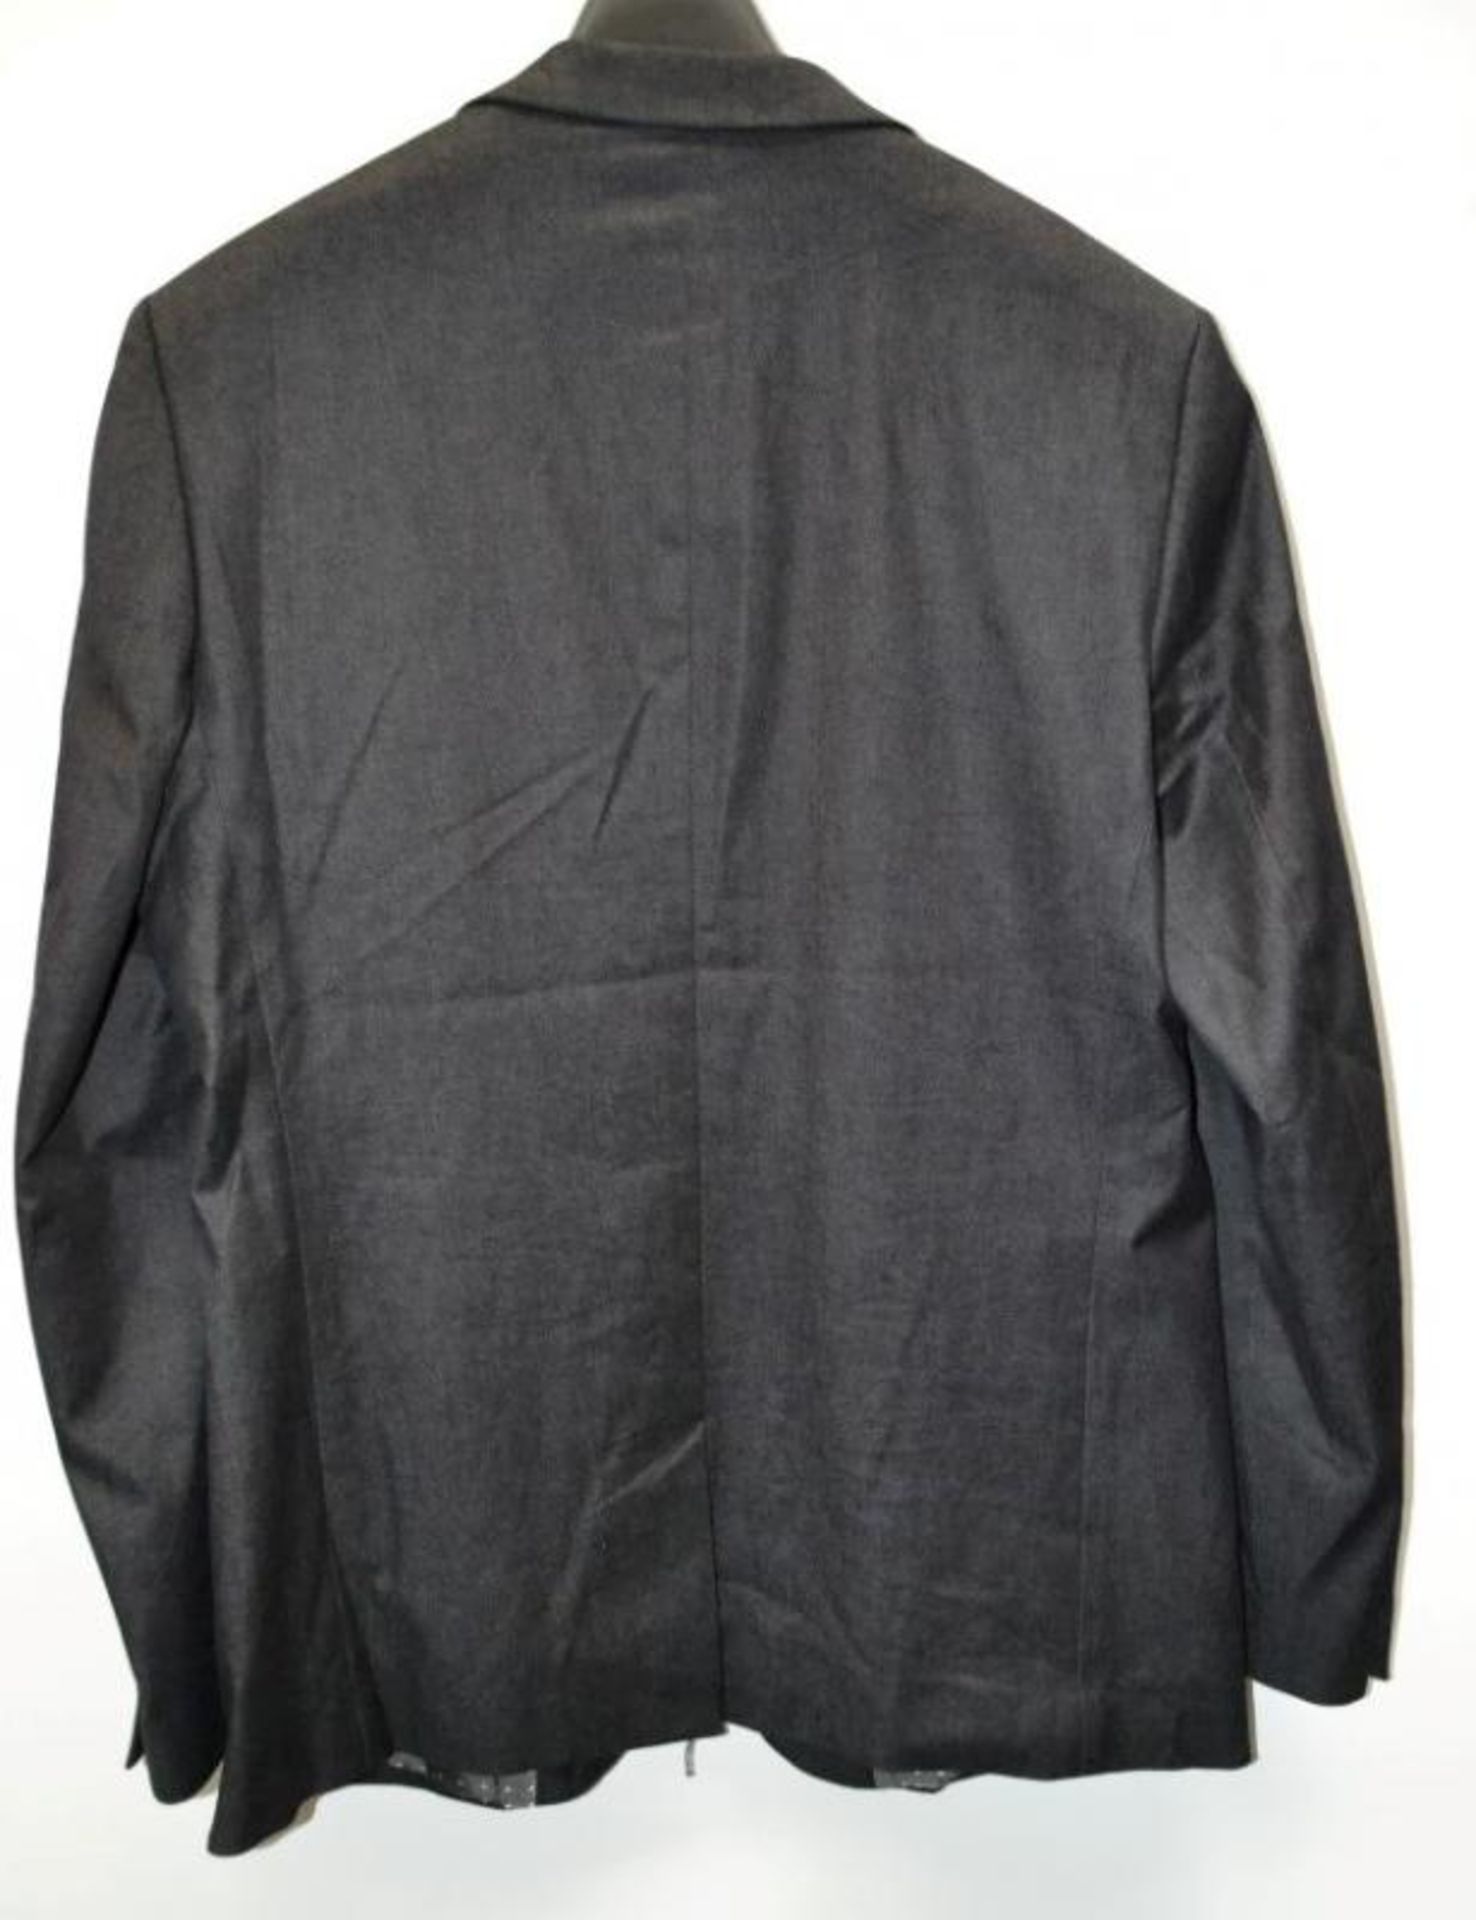 1 x PRE END Branded "Dom" Mens Blazer Jacket - New Stock With Tags - Recent Store Closure - - Image 2 of 2